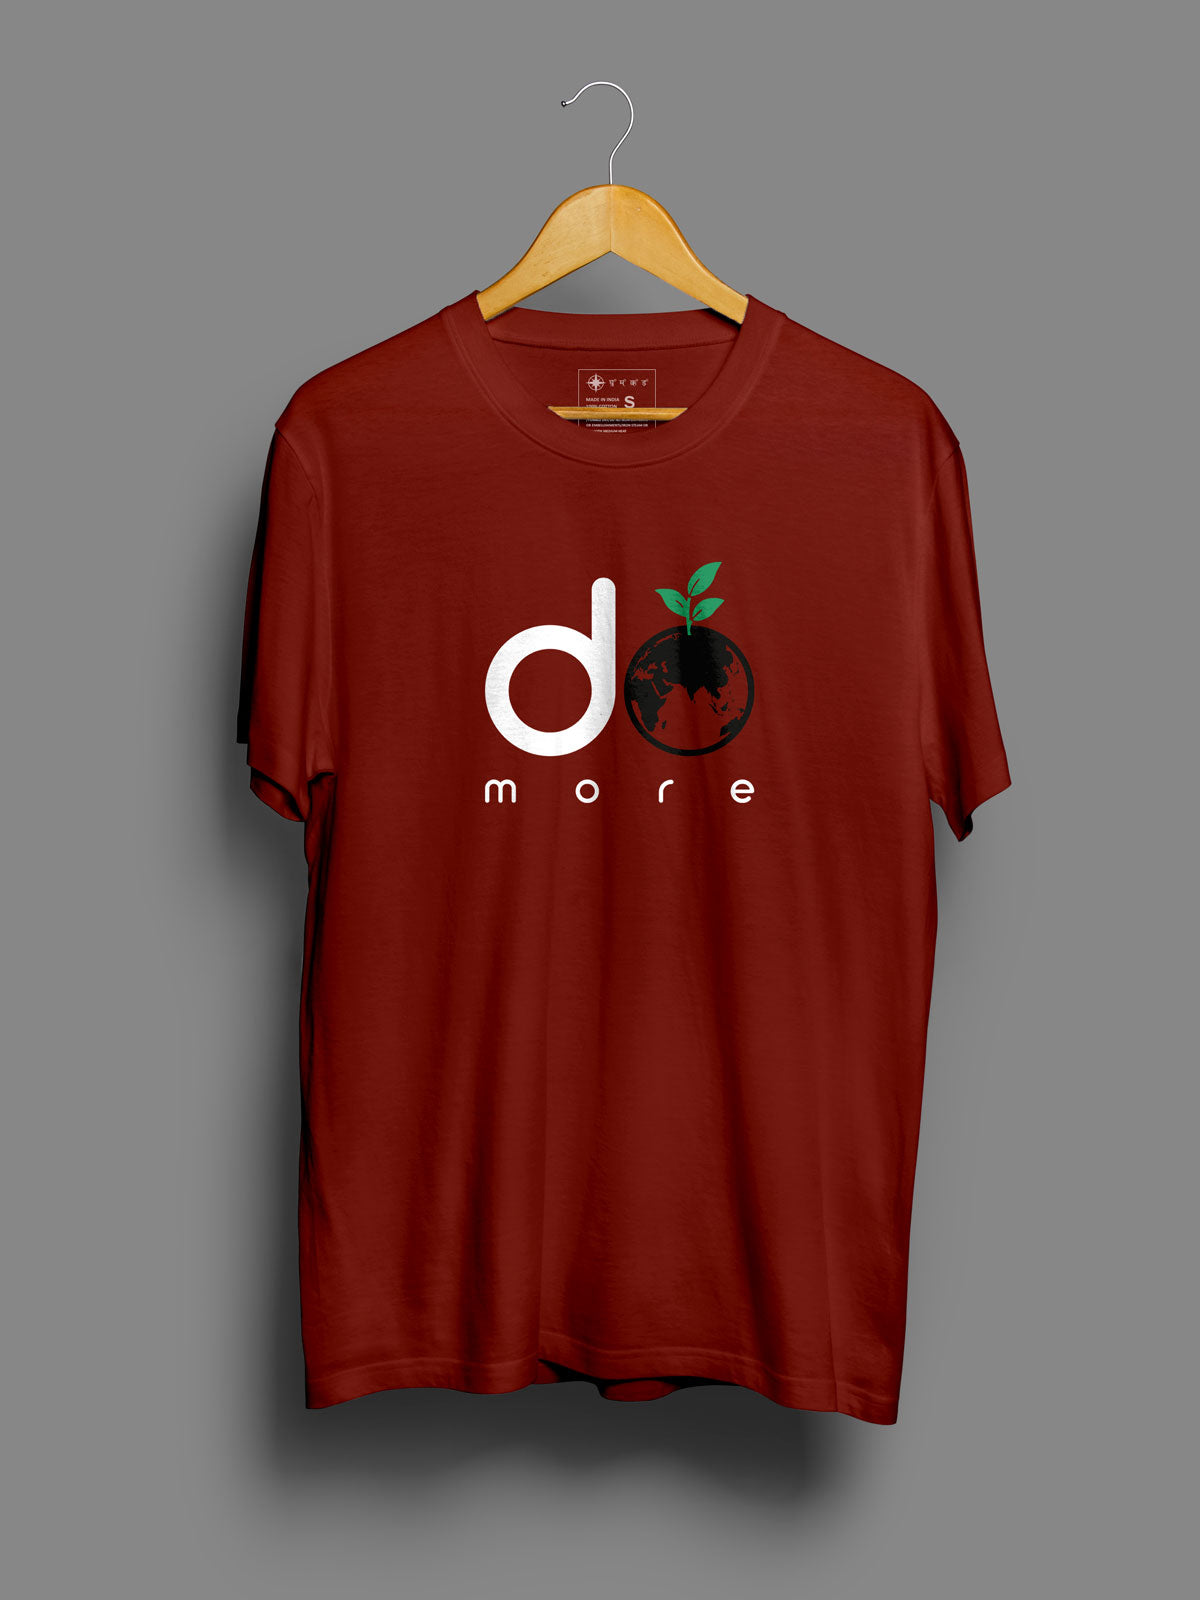 Do-more-printed-t-shirt-for-men by Ghumakkad